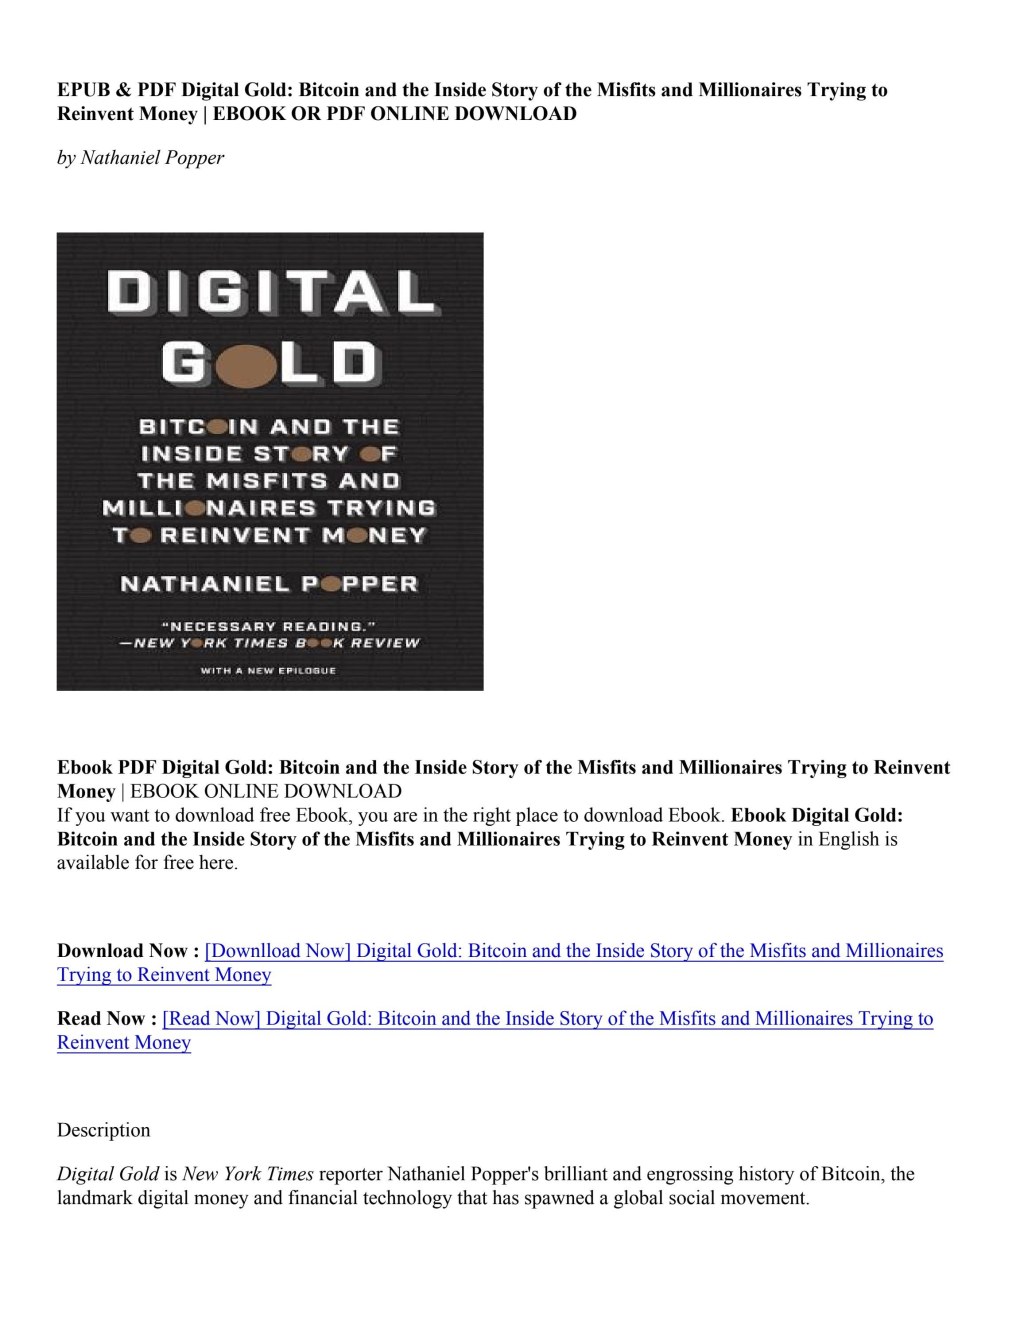 Picture of: Download PDF Digital Gold: Bitcoin and the Inside Story of the